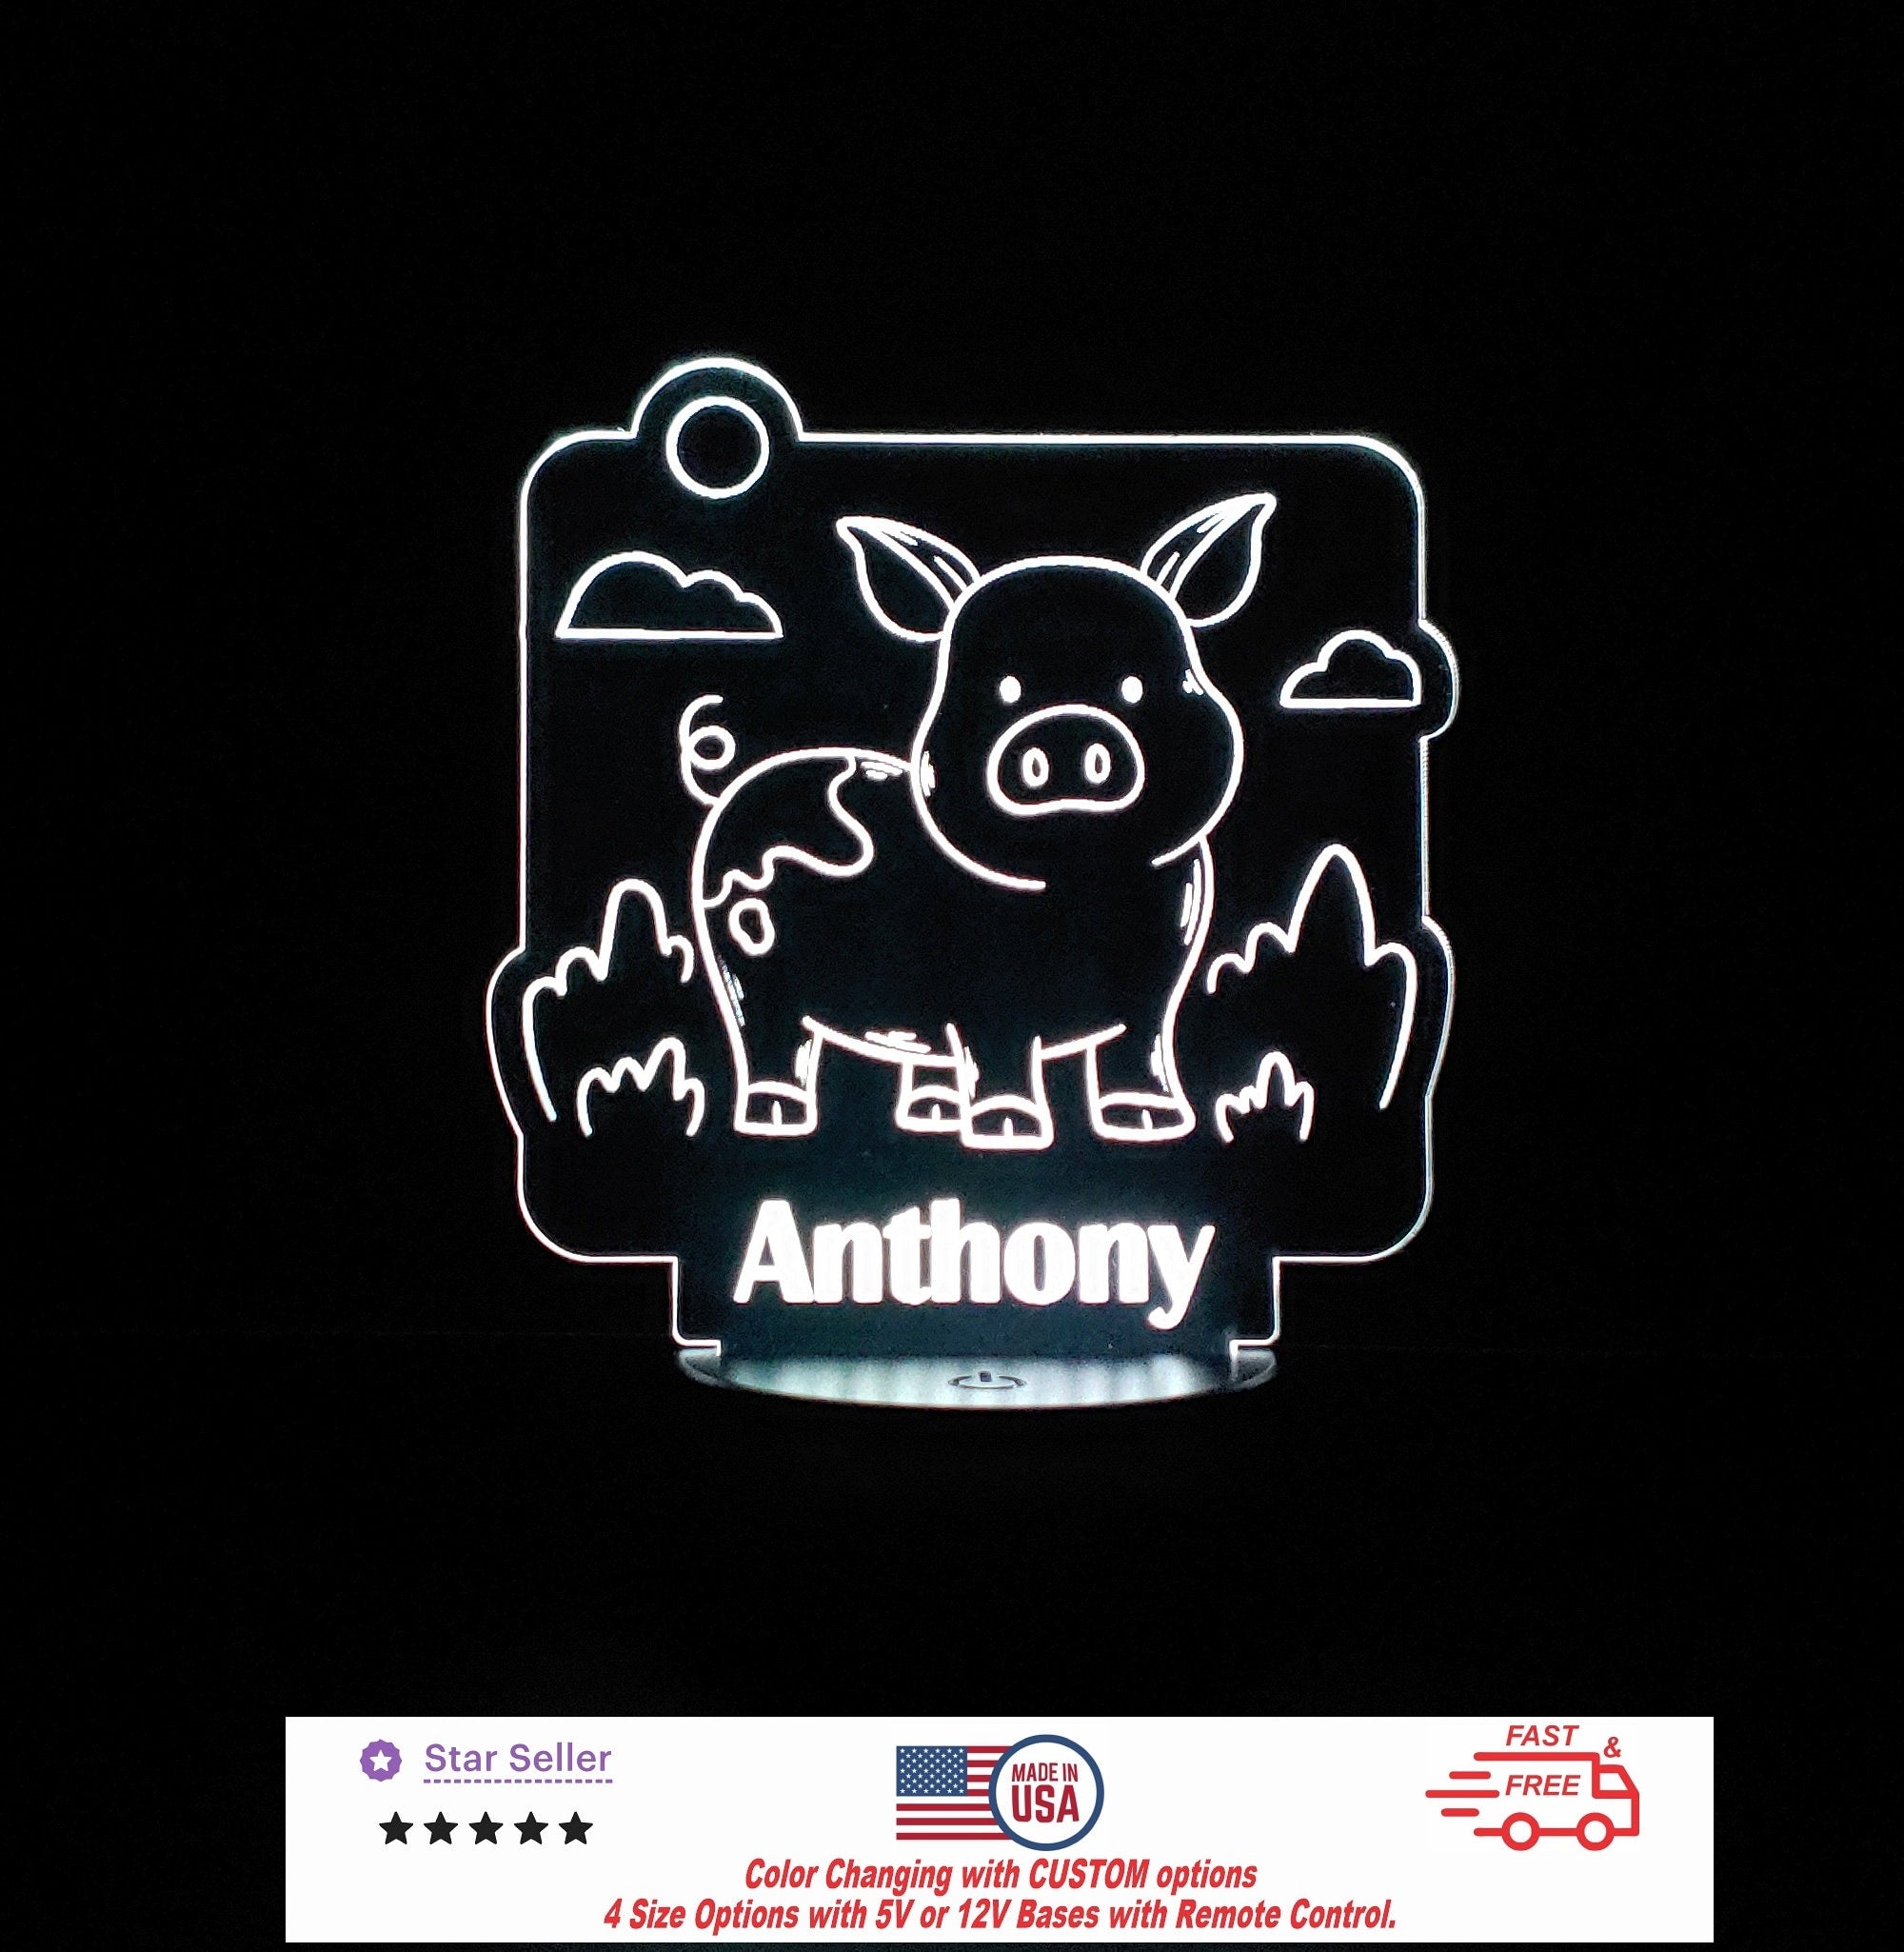 Custom Baby Pig Personalized LED Night Light - Neon sign, Room Decor, Party Enhancer, Nursery, Kids' Room, Free Shipping Made in USA